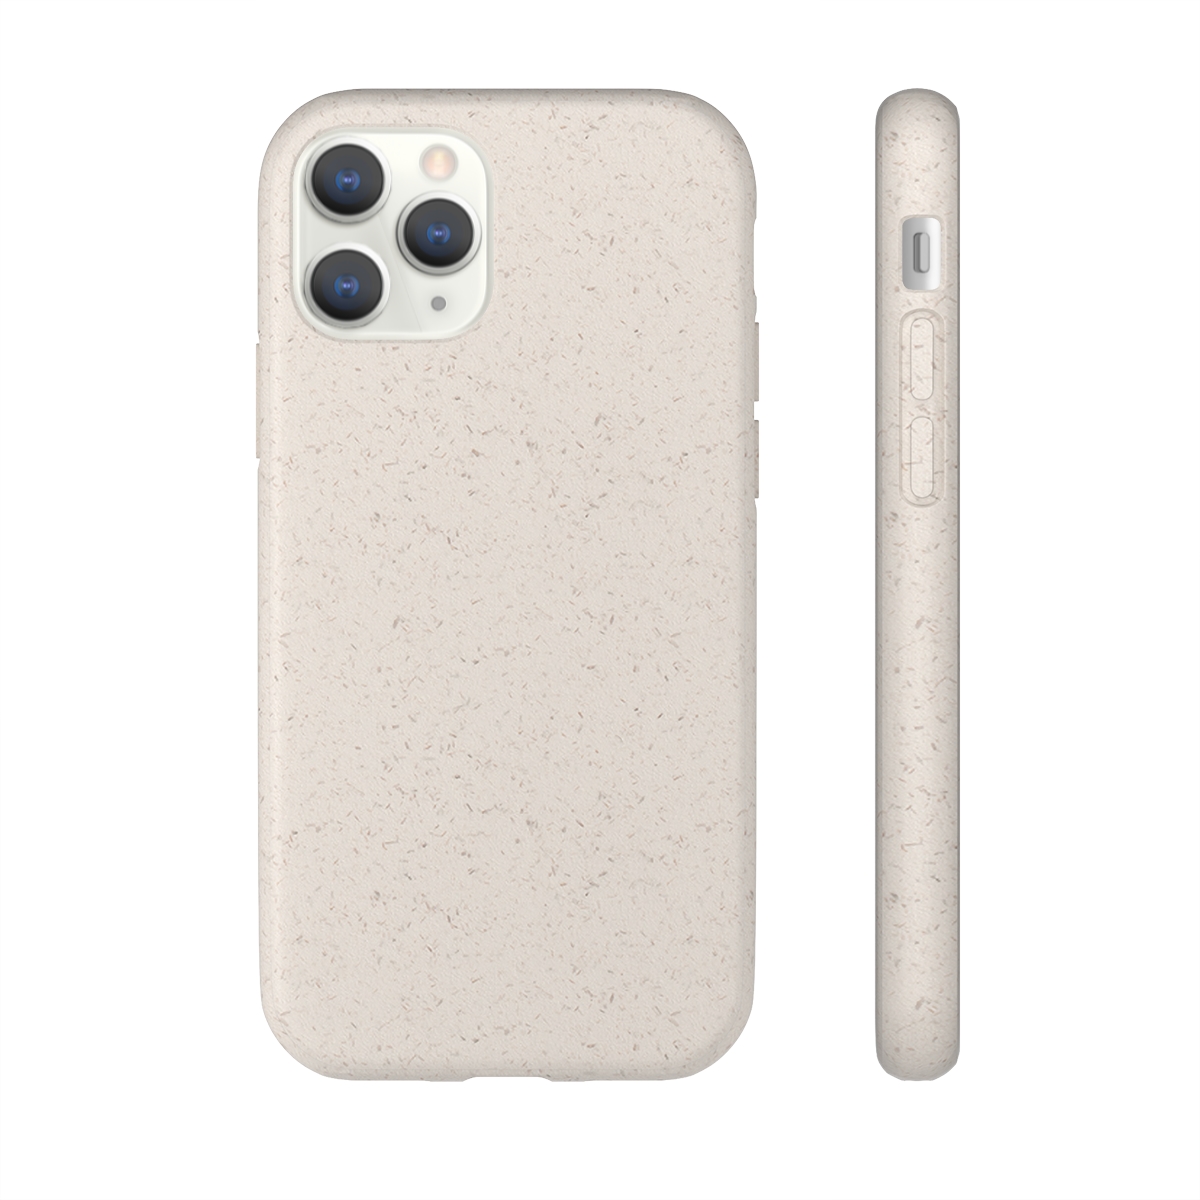 Biodegradable phone case – the eco approach to protect your phone